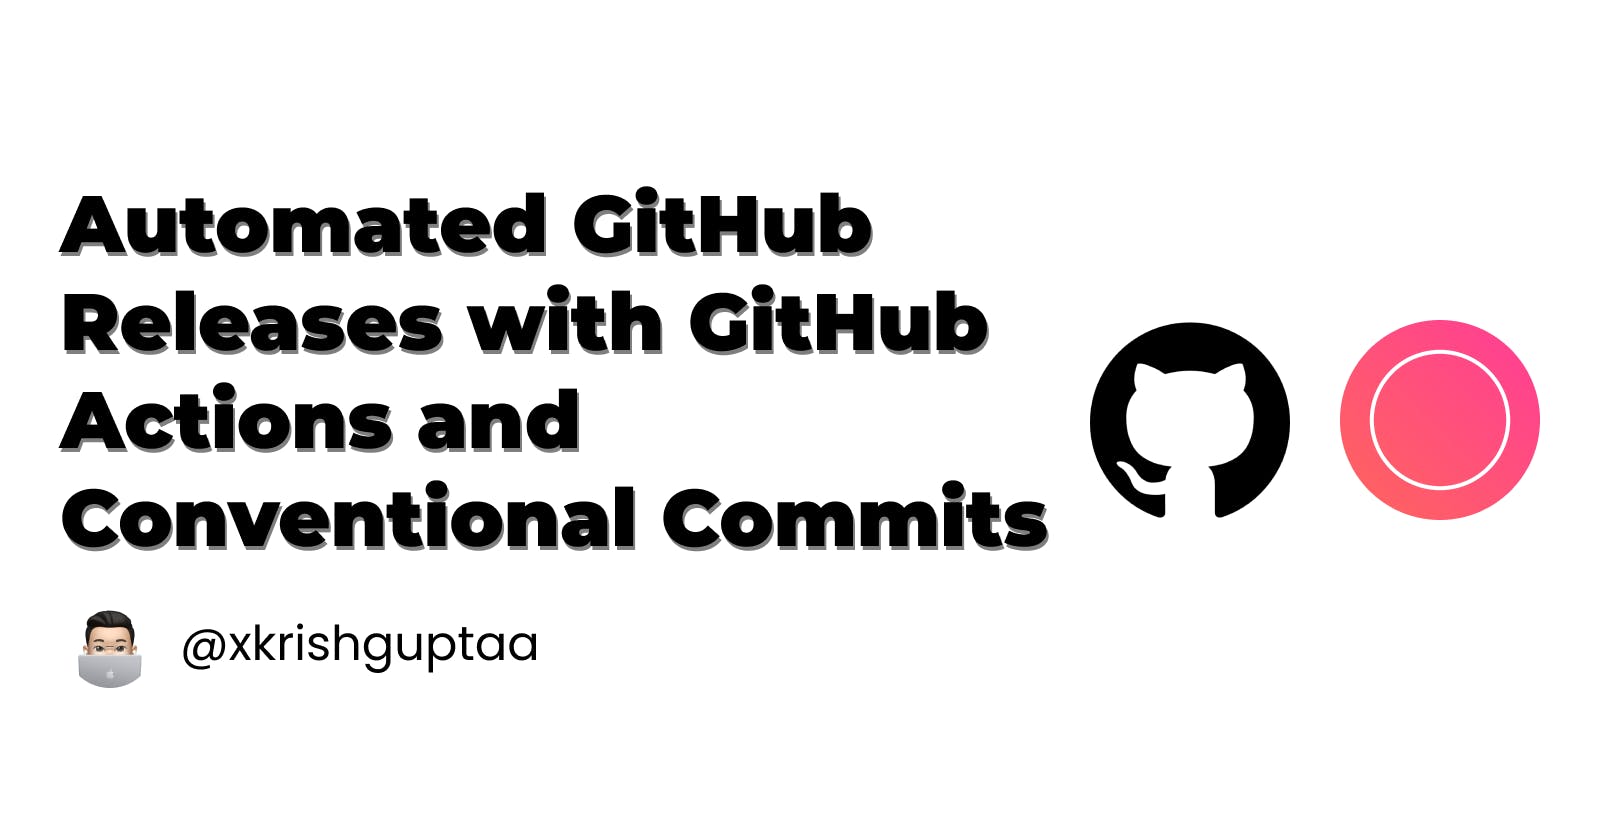 Automated GitHub Releases with GitHub Actions and Conventional Commits